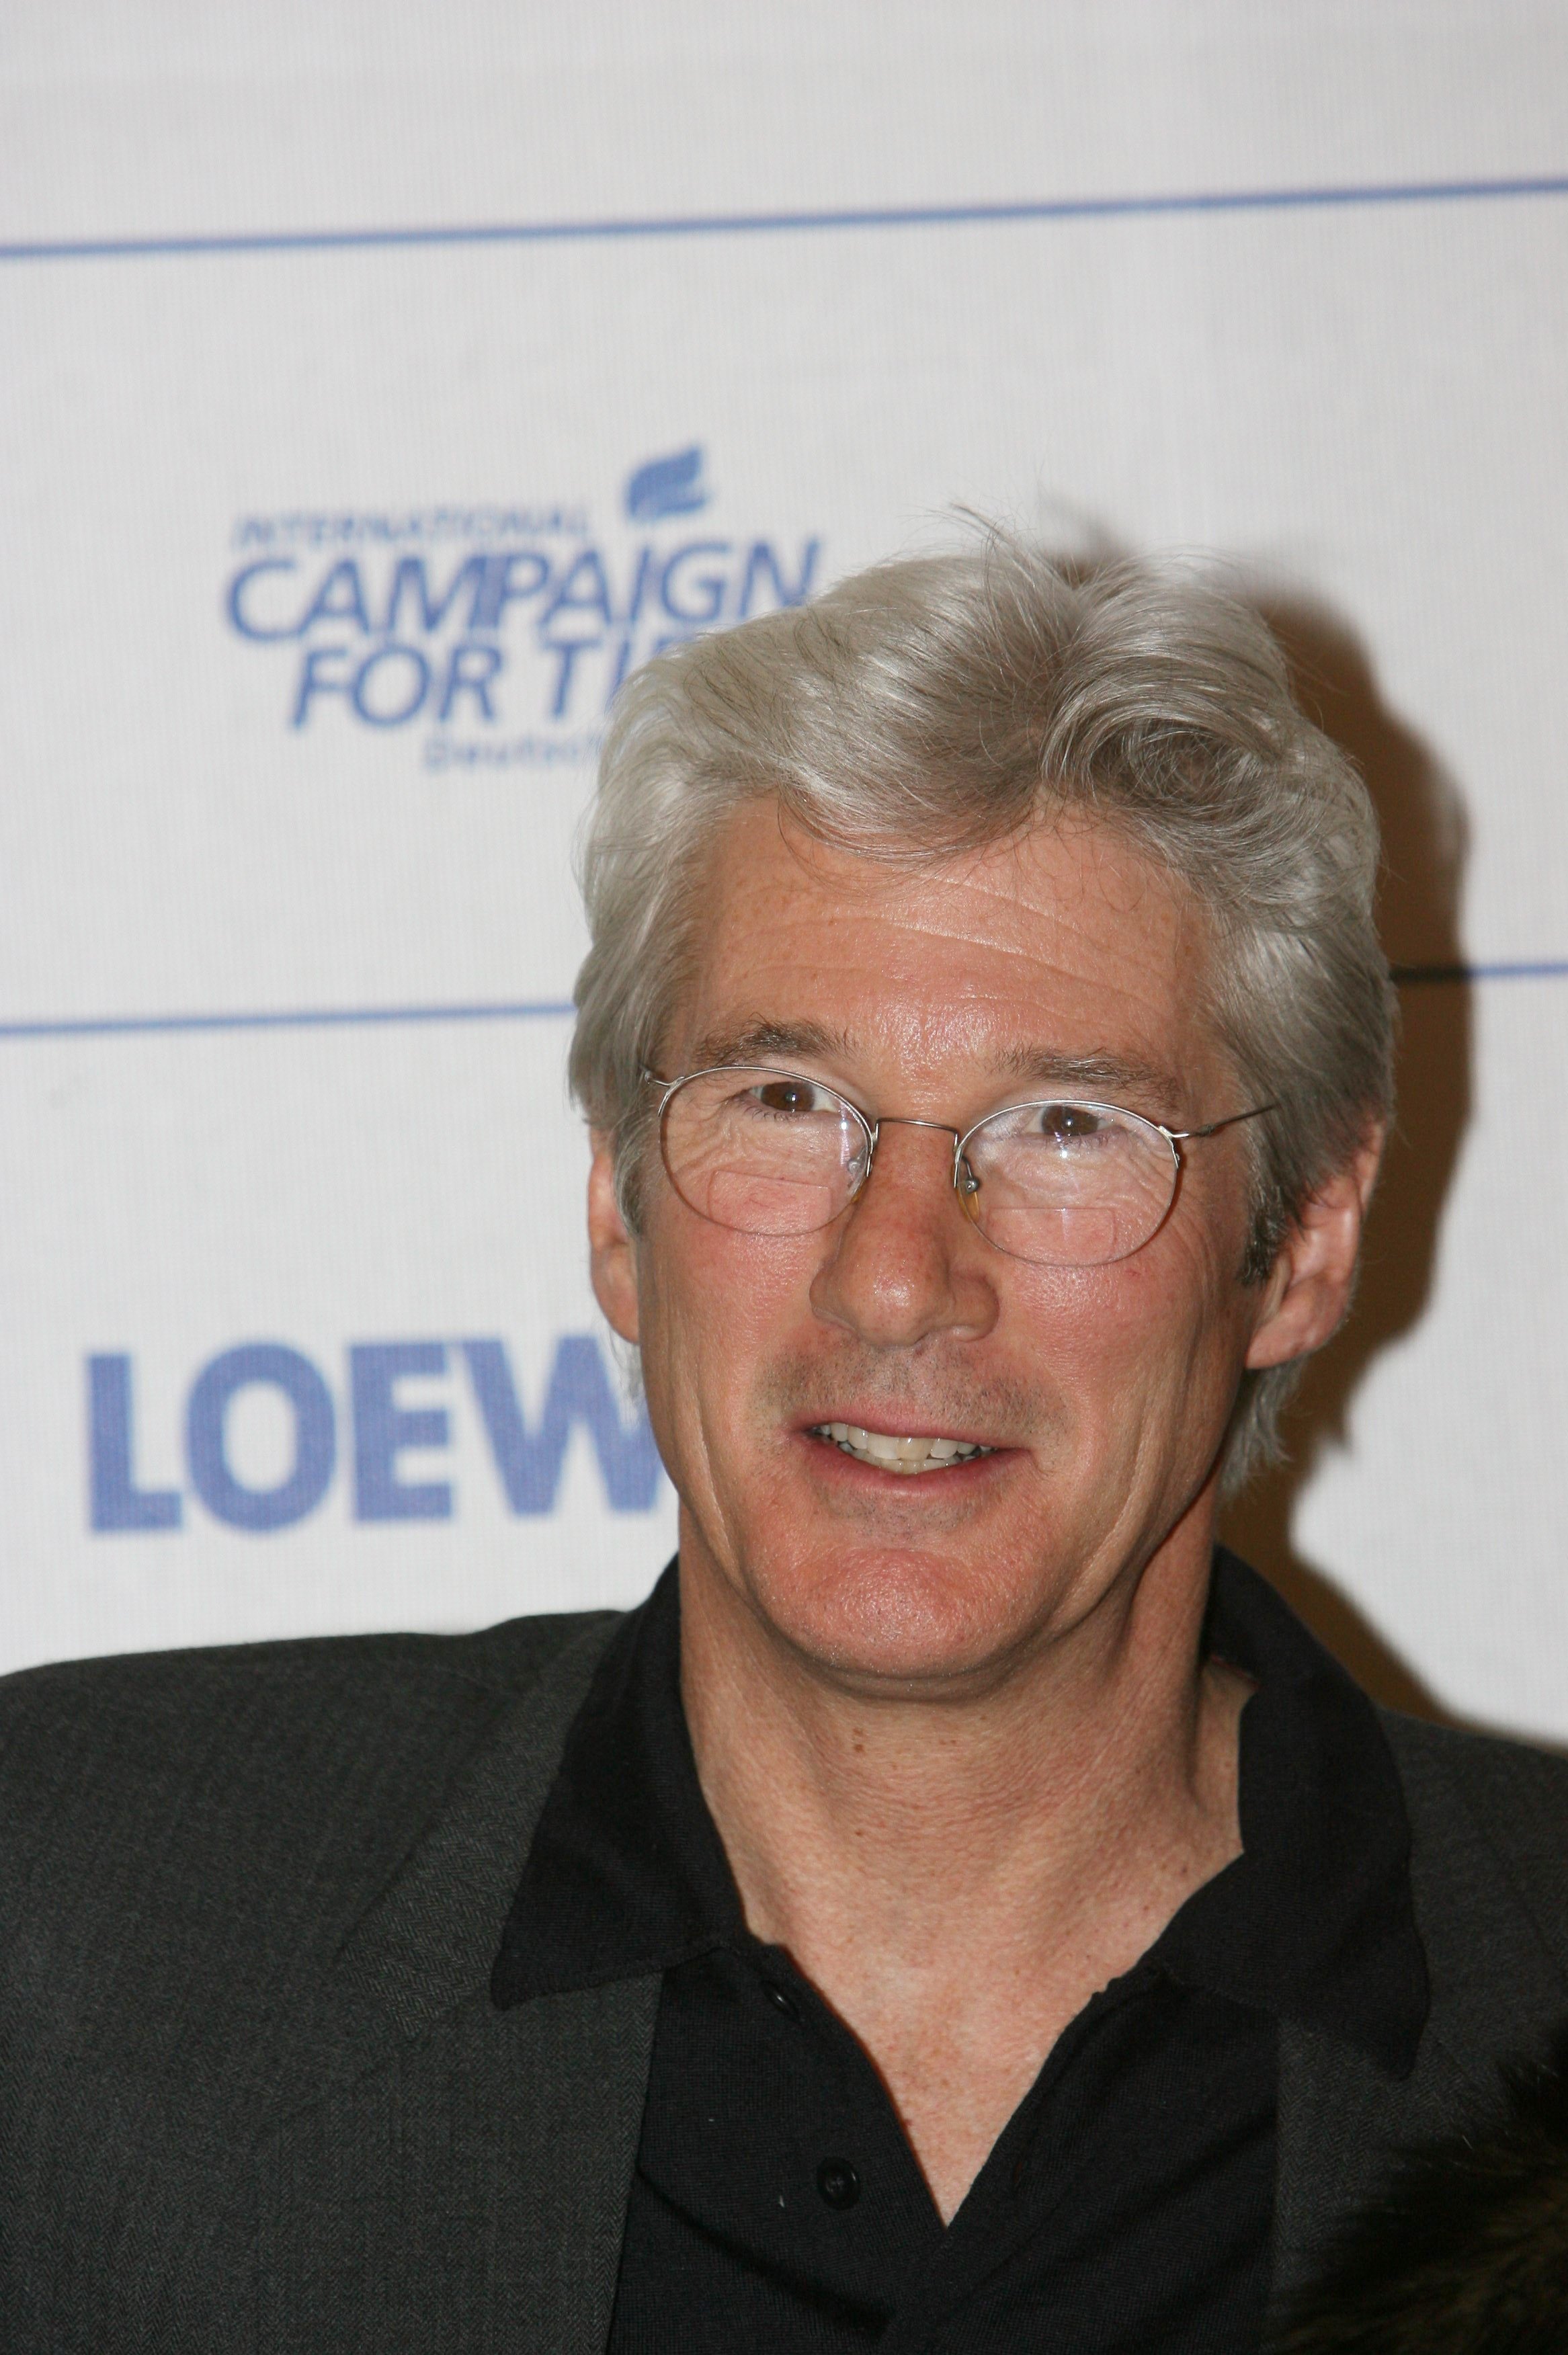 Richard Gere in Berlin on February 12, 2007 | Source: Getty Images